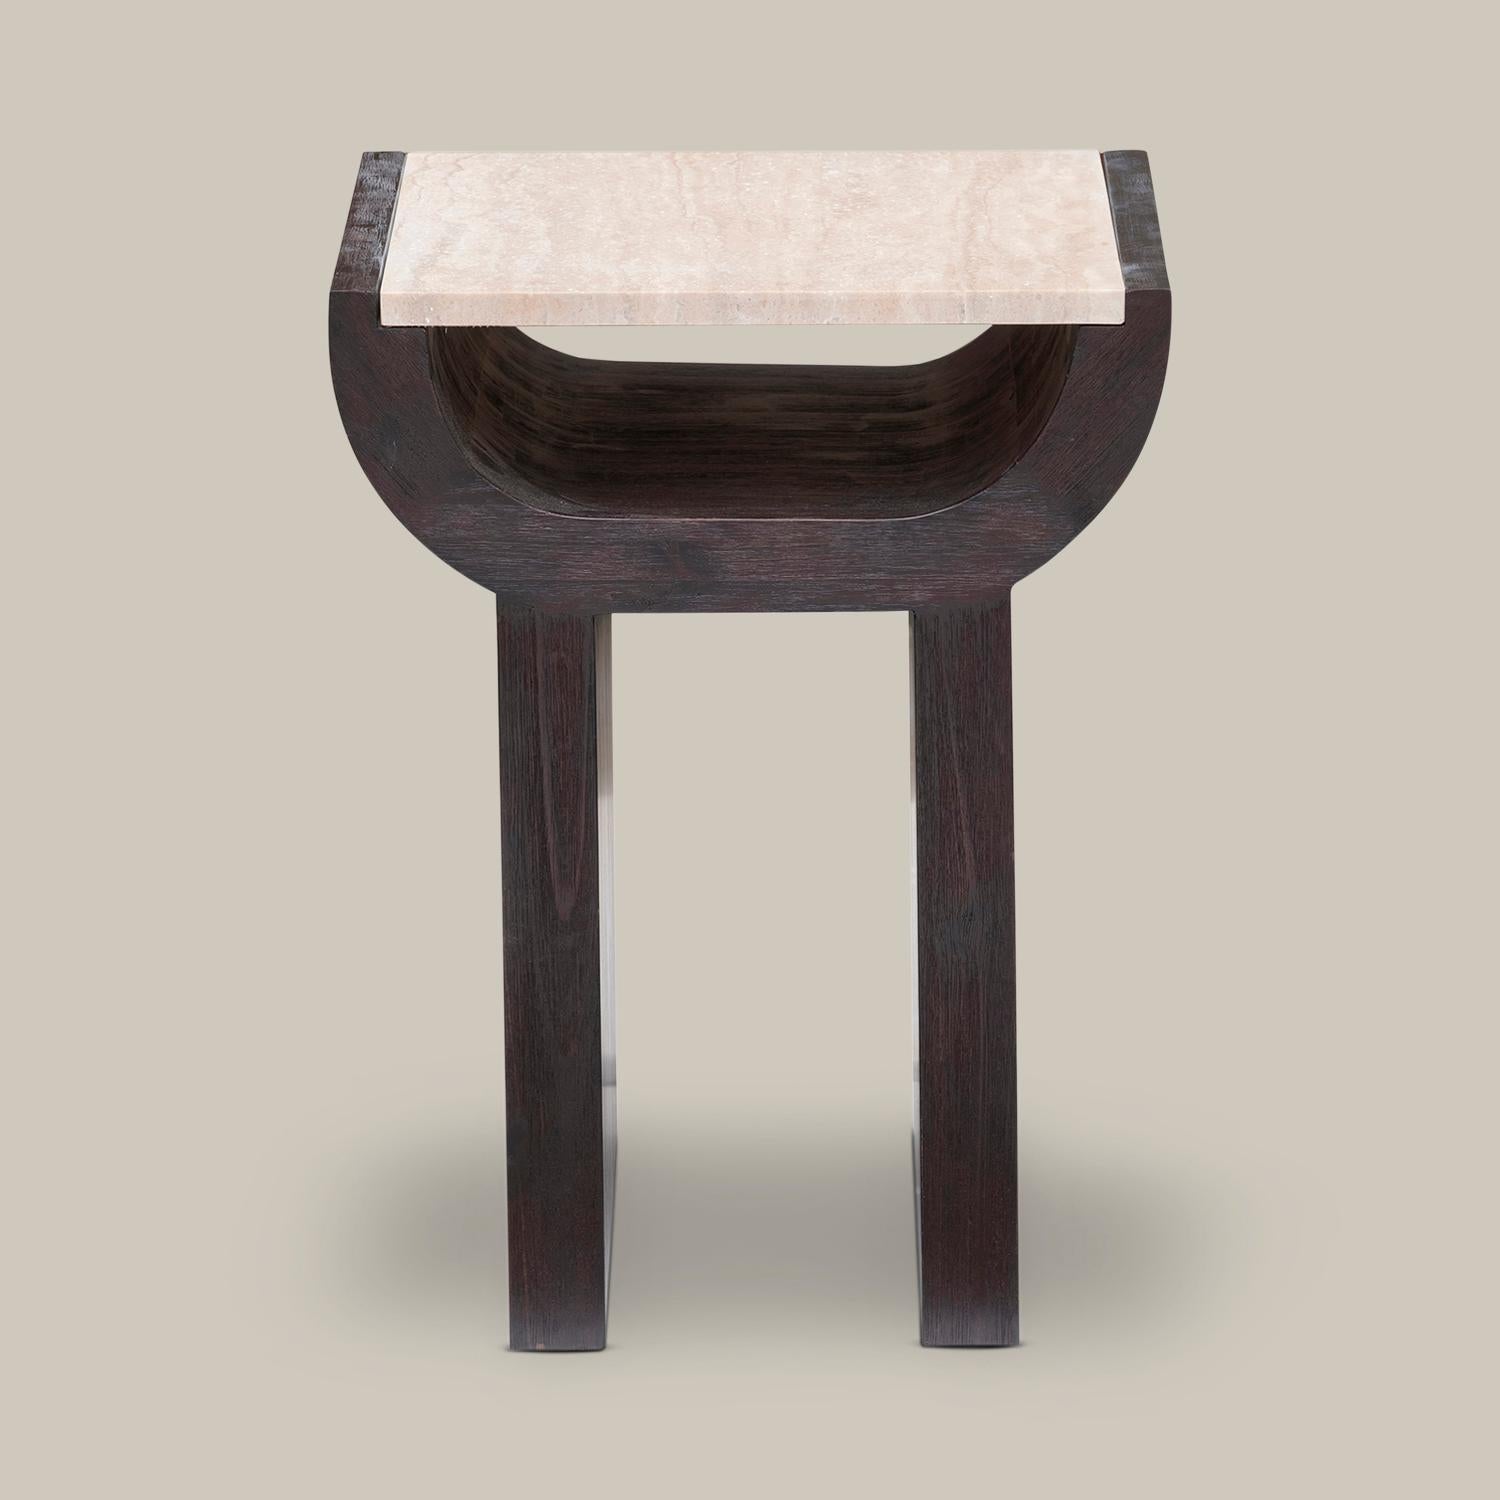 The Malus side table features dual walls that rise to an inverted arch beneath a honed natural travertine top in this artistic, sculptural side table. The inverted arch doubles as storage space for books, magazines and journals. This piece floats